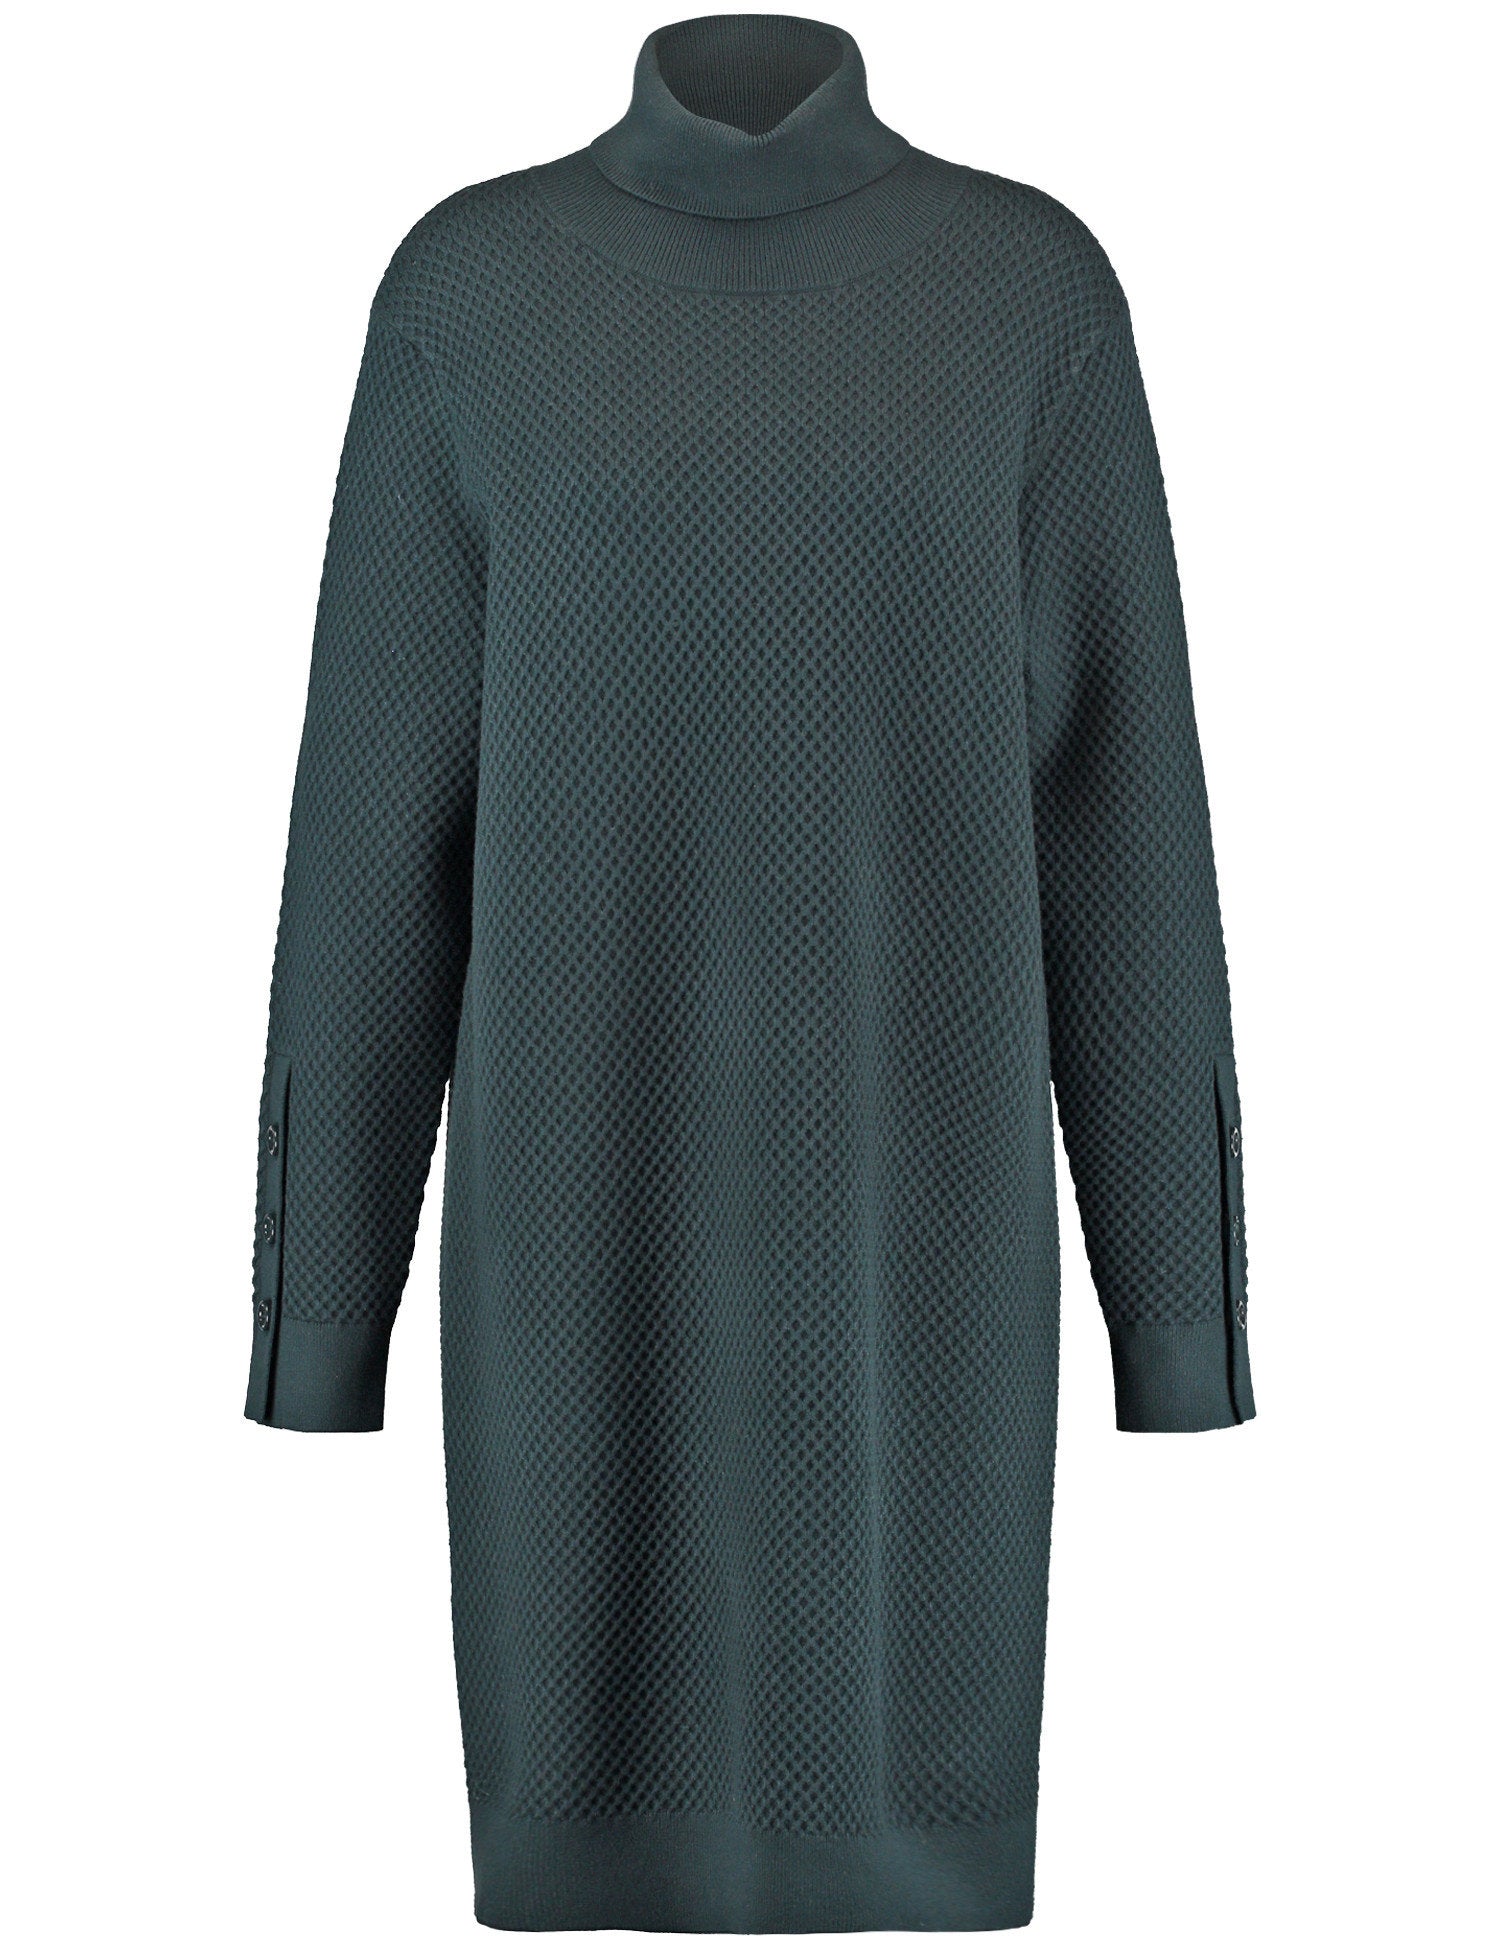 Knit Dress With A Polo Collar And A Button Detail On The Sleeves_280106-35713_50939_02